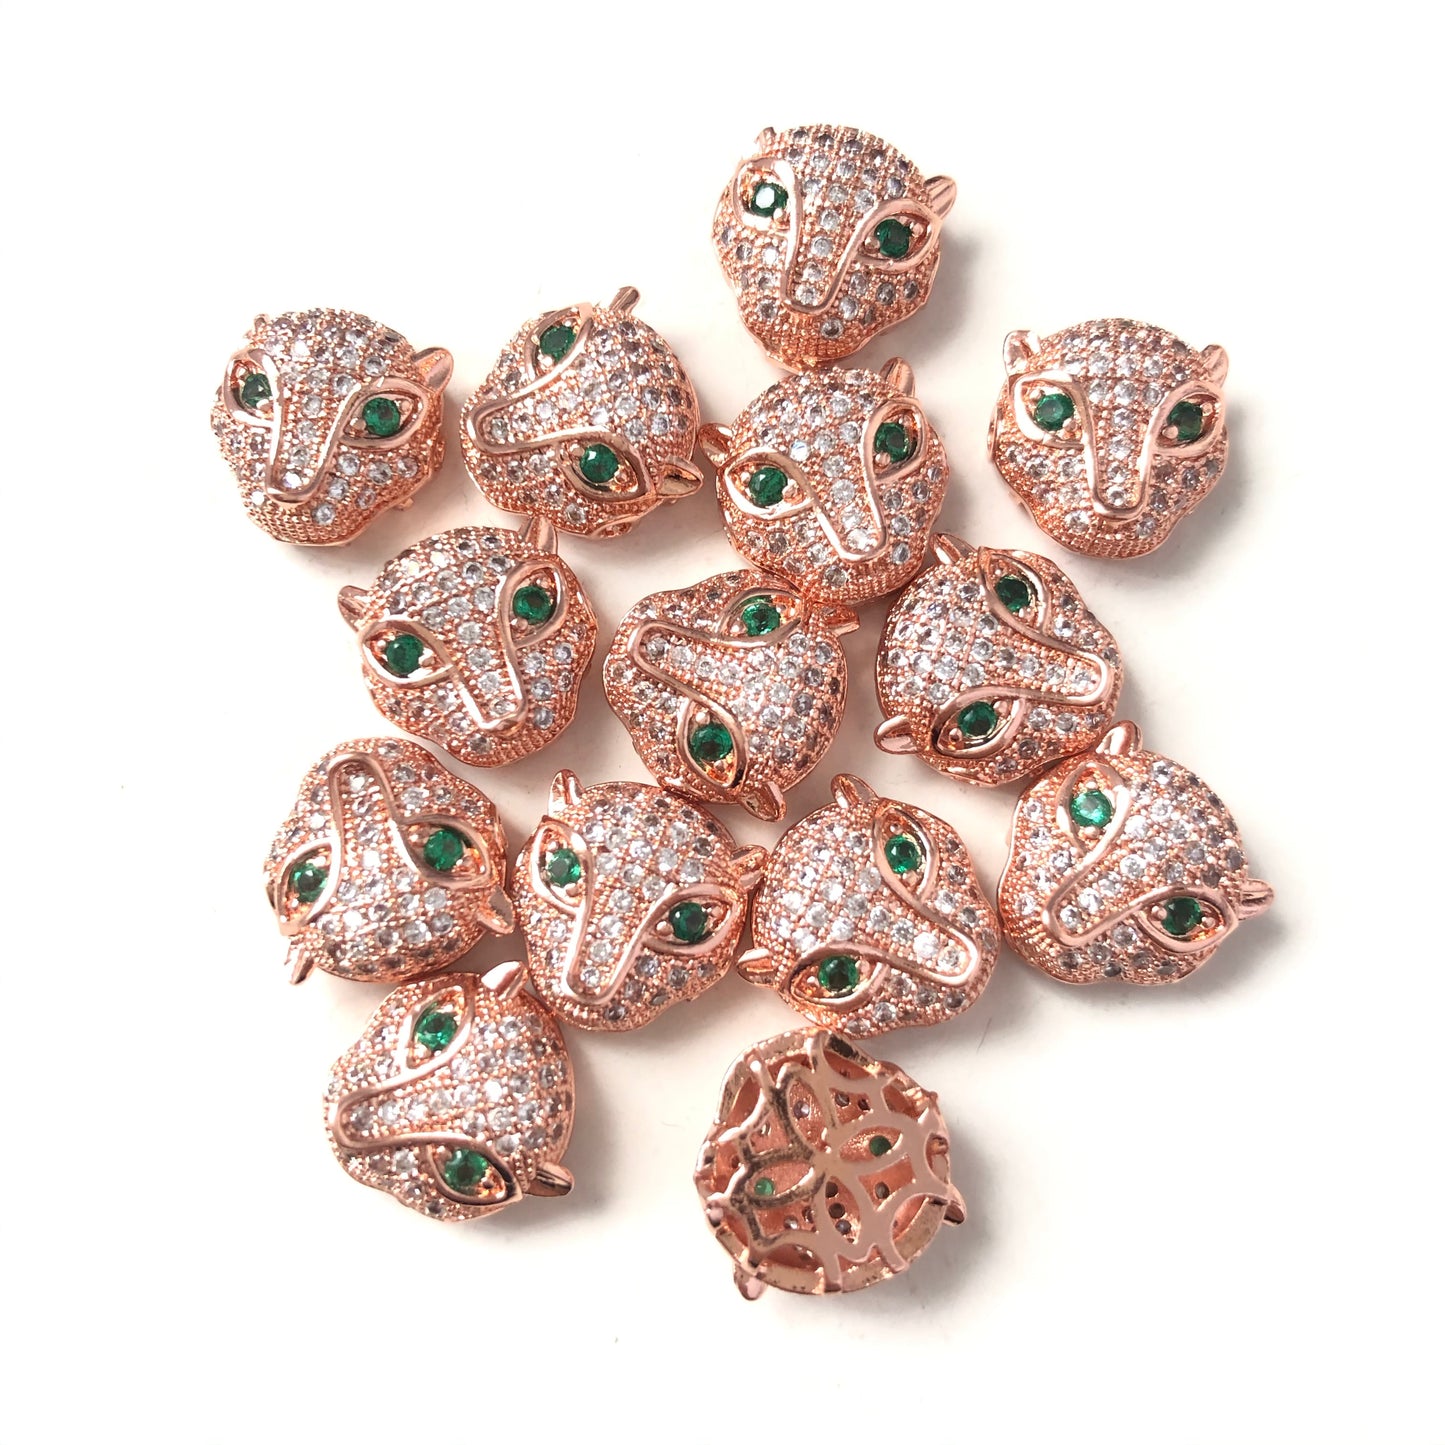 20pcs/lot Clear CZ Paved Panther Head Spacers Rose Gold CZ Paved Spacers Animal Spacers Charms Beads Beyond